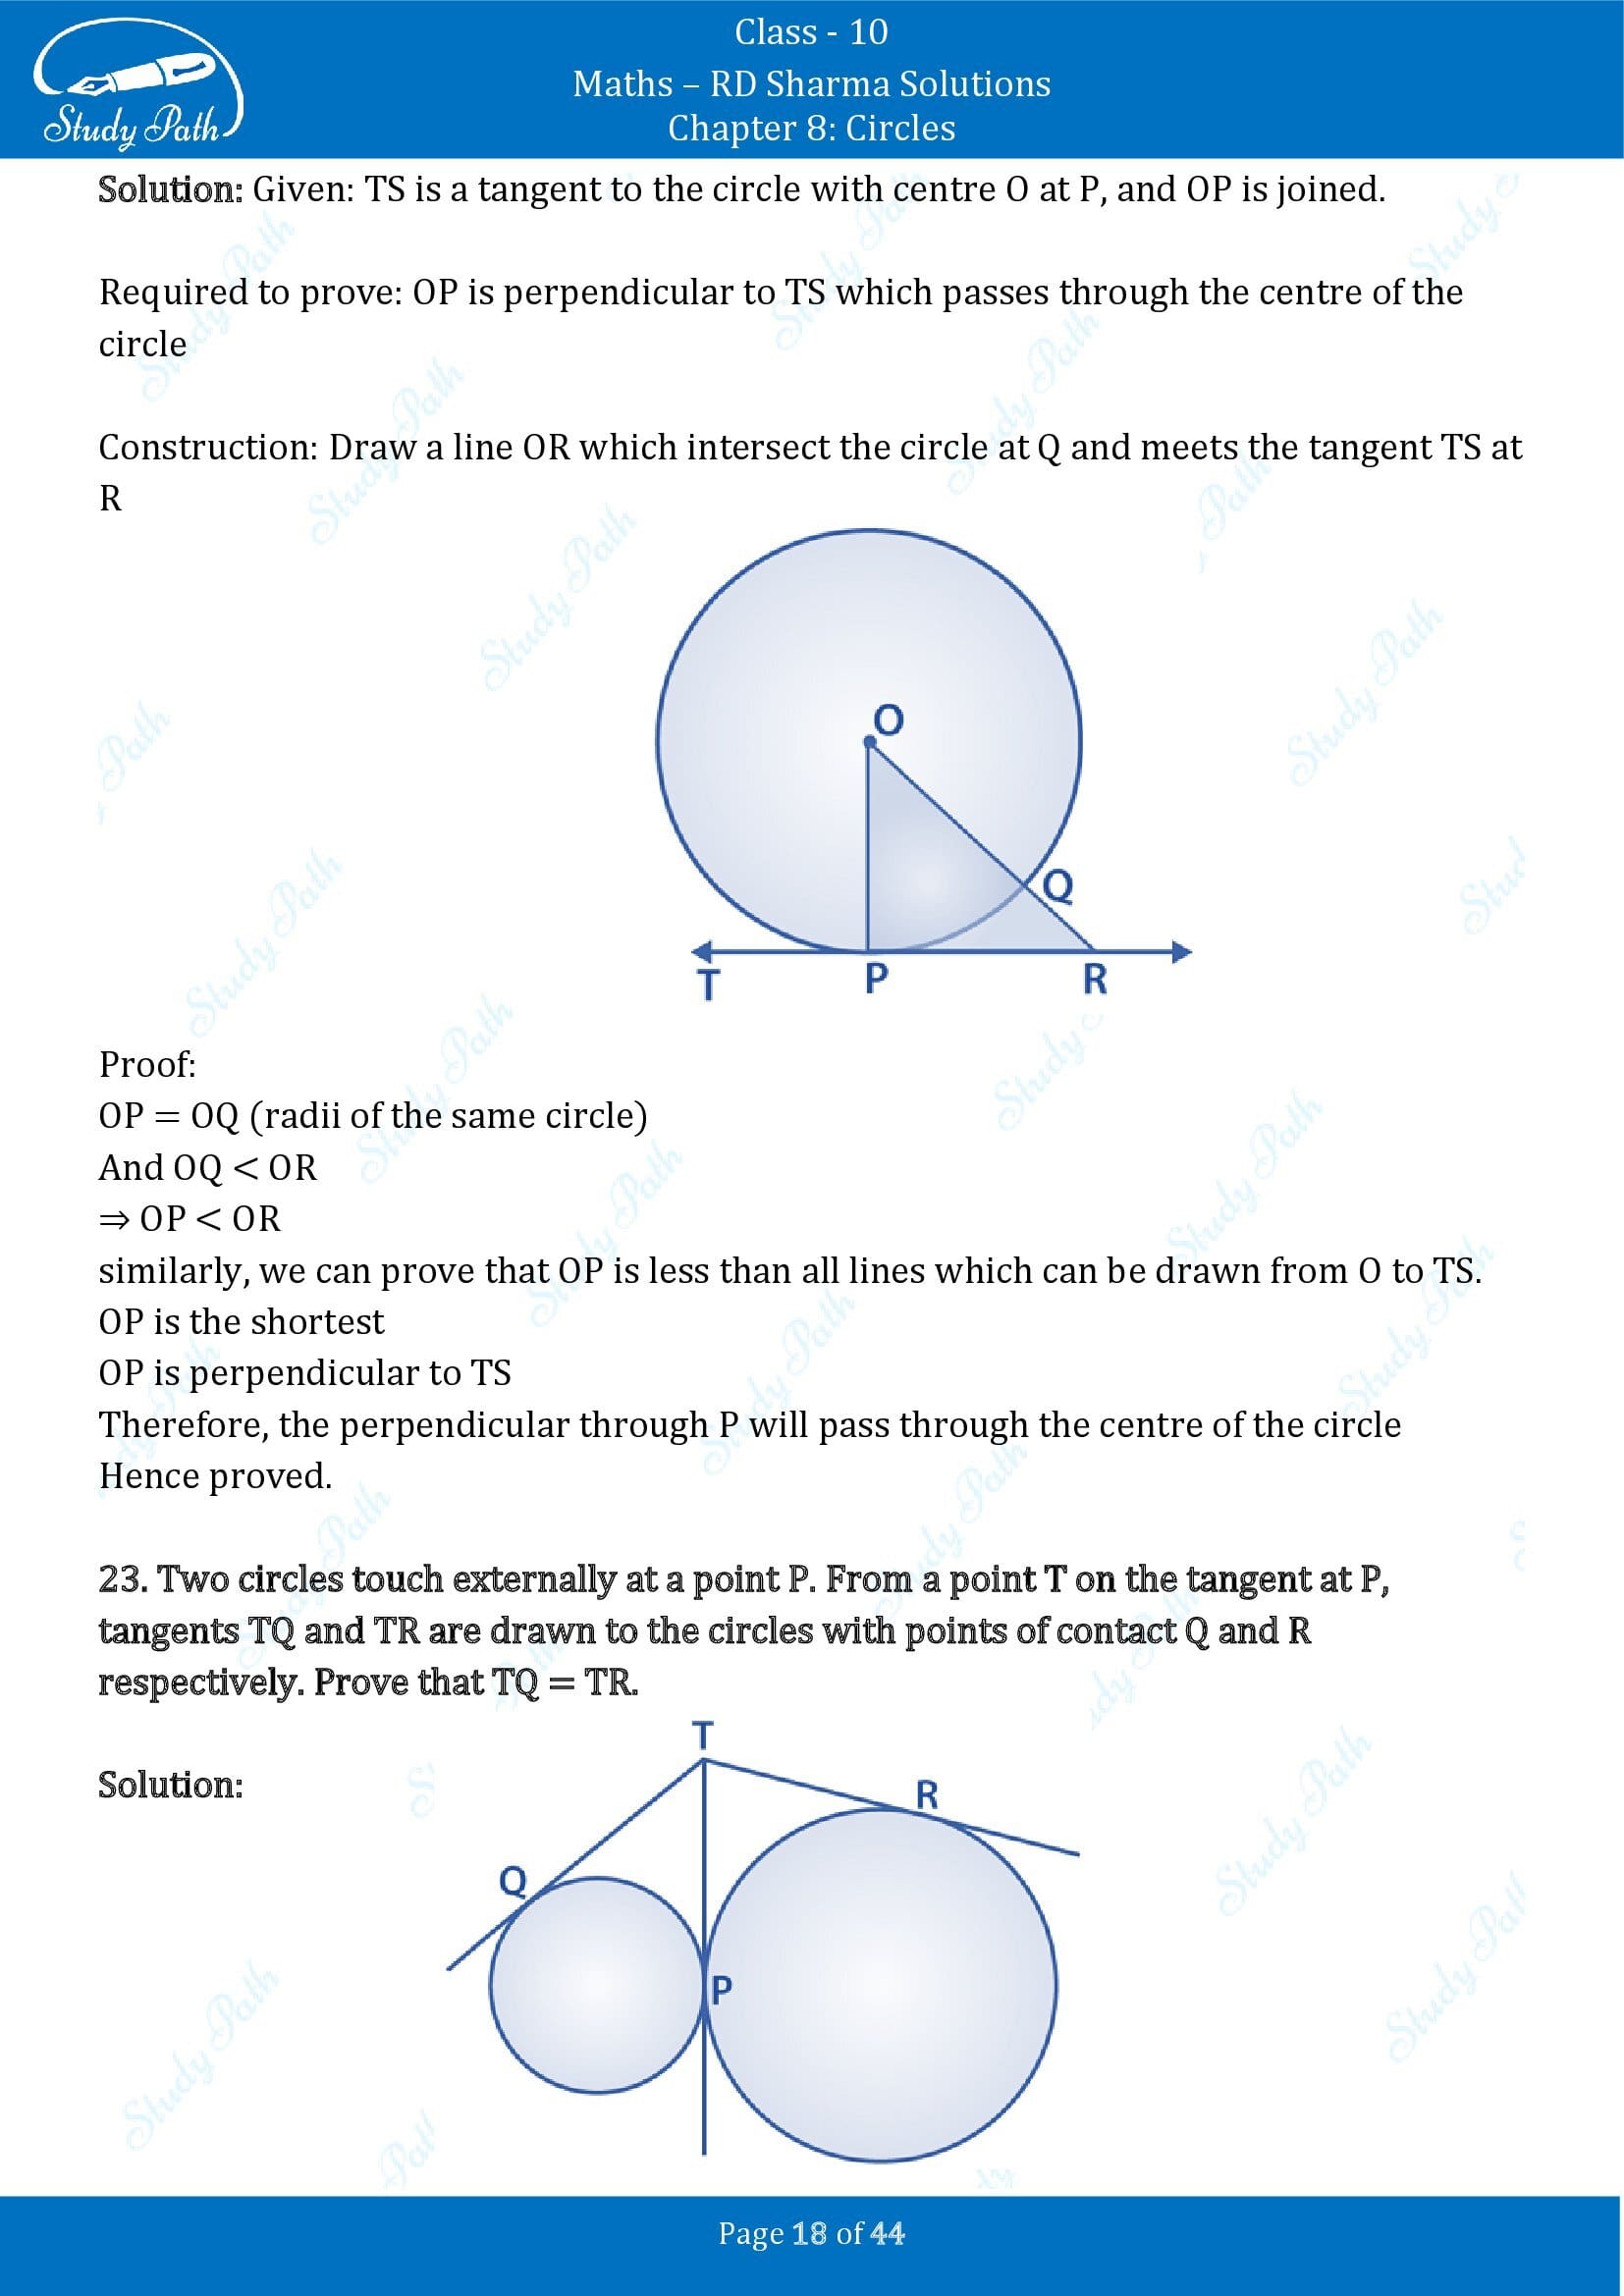 RD Sharma Solutions Class 10 Chapter 8 Circles Exercise 8.2 00018